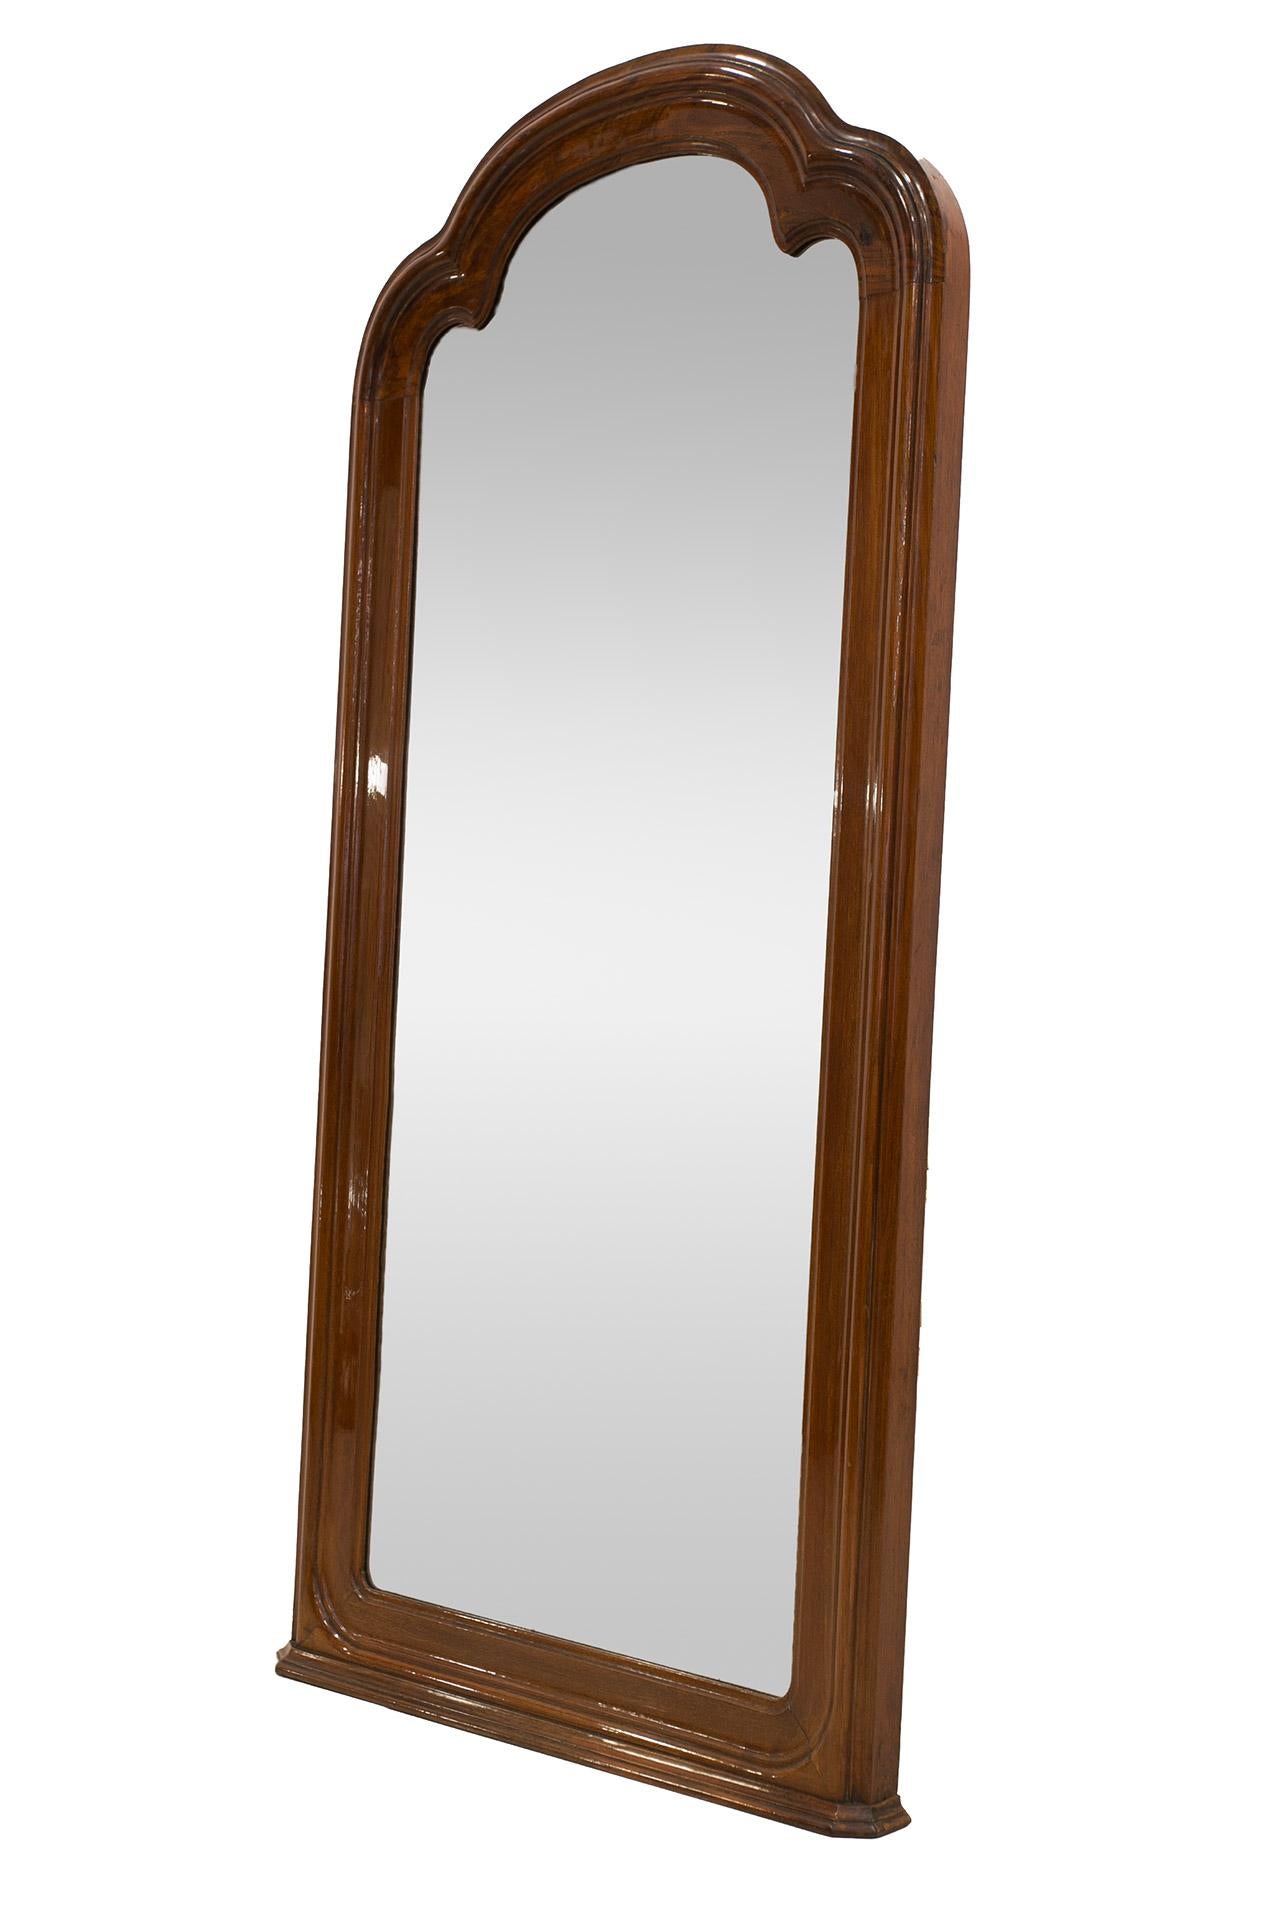 This mirror comes from the 1860s. The shape of the mirror is a rectangle, the top is crowned with a decorative arch. The profiled frame is made of a precious wood - mahogany, which was polished to a high gloss. The mirror can be hang or can be